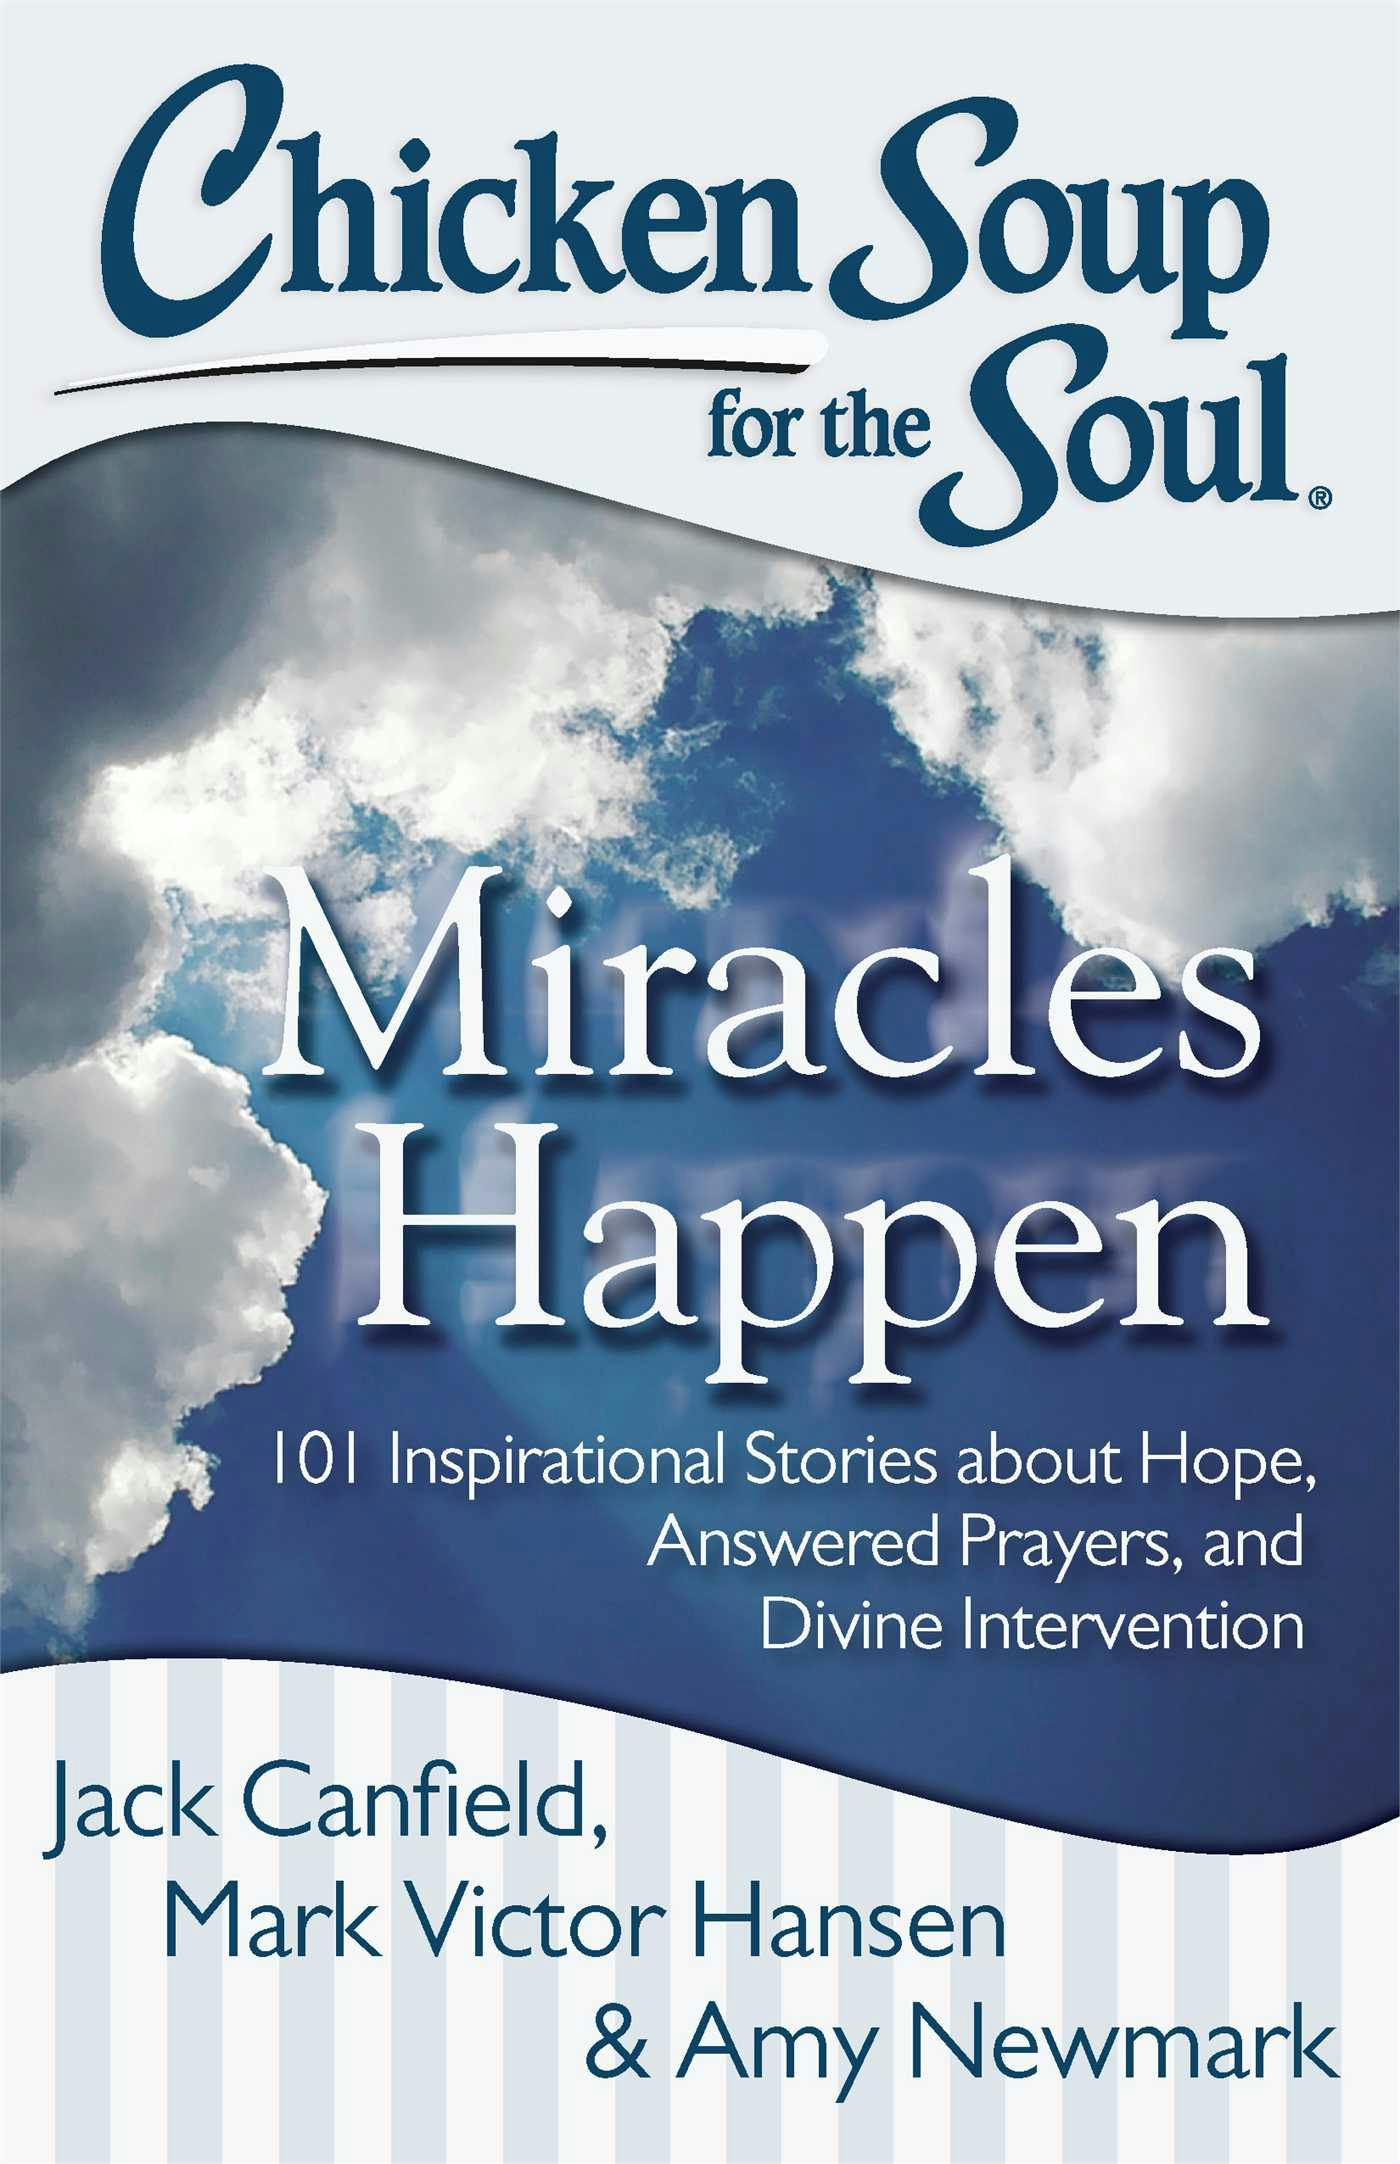 Chicken Soup for the Soul: Miracles Happen: 101 Inspirational Stories about Hope, Answered Prayers, and Divine Intervention - Mark Victor Hansen, Jack Canfield, Amy Newmark